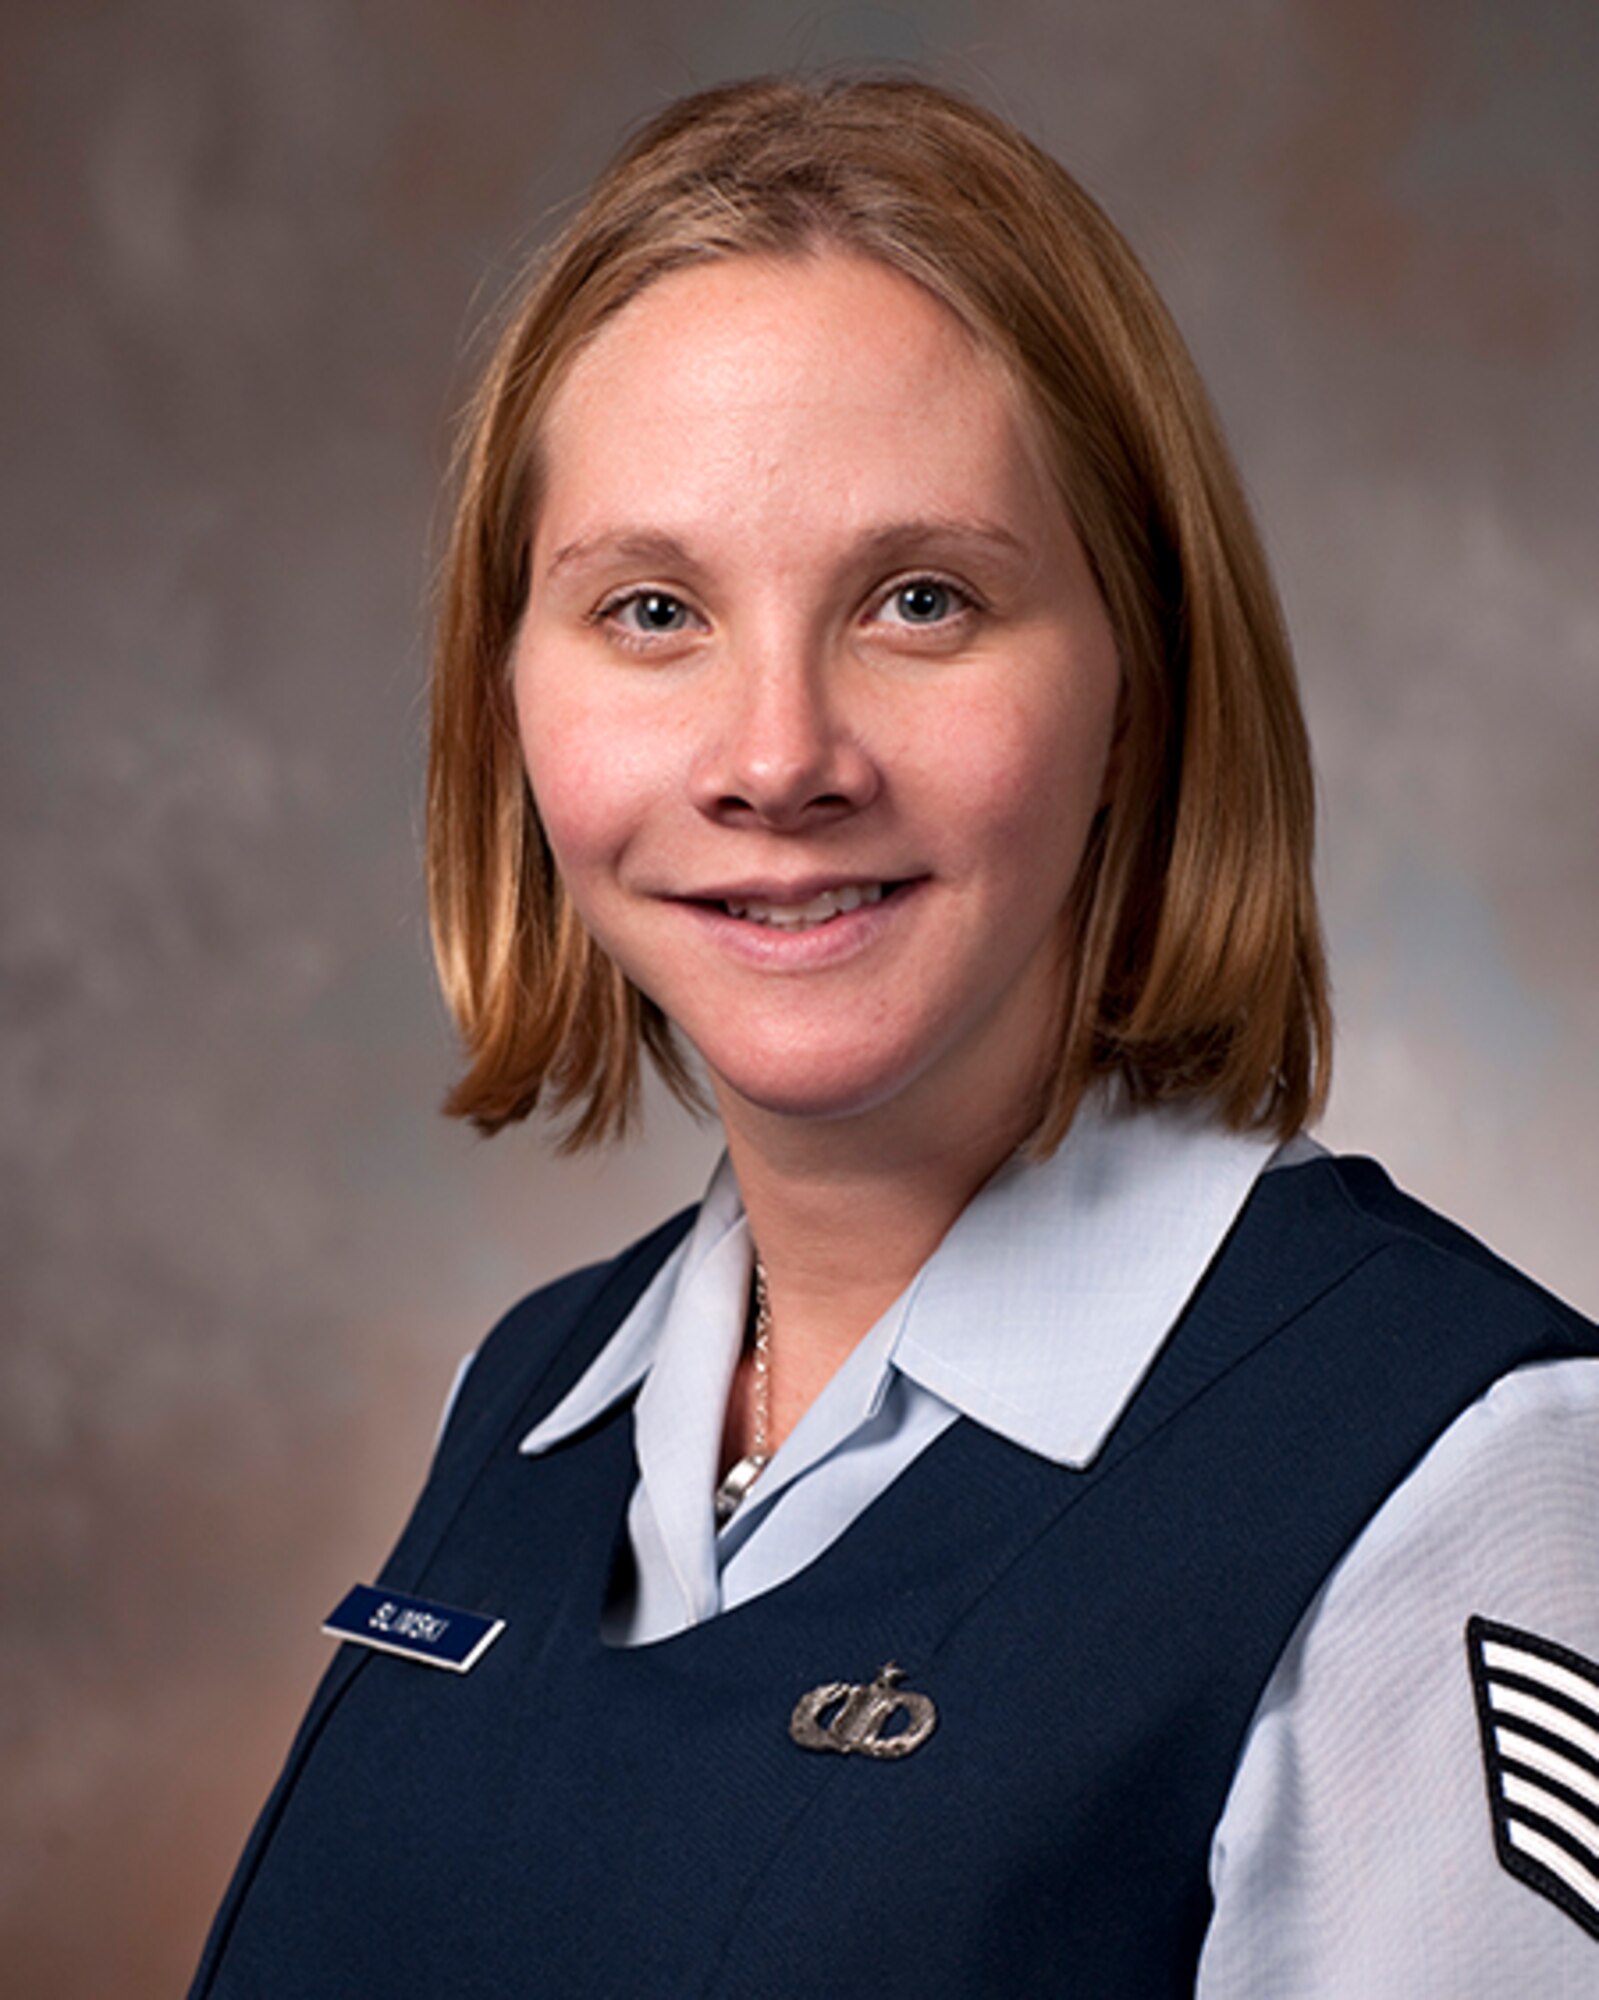 Tech. Sgt. Lindsay Slimski is one of five members of the Air Force inaugural class enrolled in the Enlisted to Medical Degree Preparatory Program. The Enlisted to Medical Degree Preparatory Program is a partnership between the Armed Services and Uniformed Services University. Designed for enlisted service members, the two-year program enables members to remain on active duty status while enrolled as full-time students in preparation for application to medical school. (Courtesy photo)